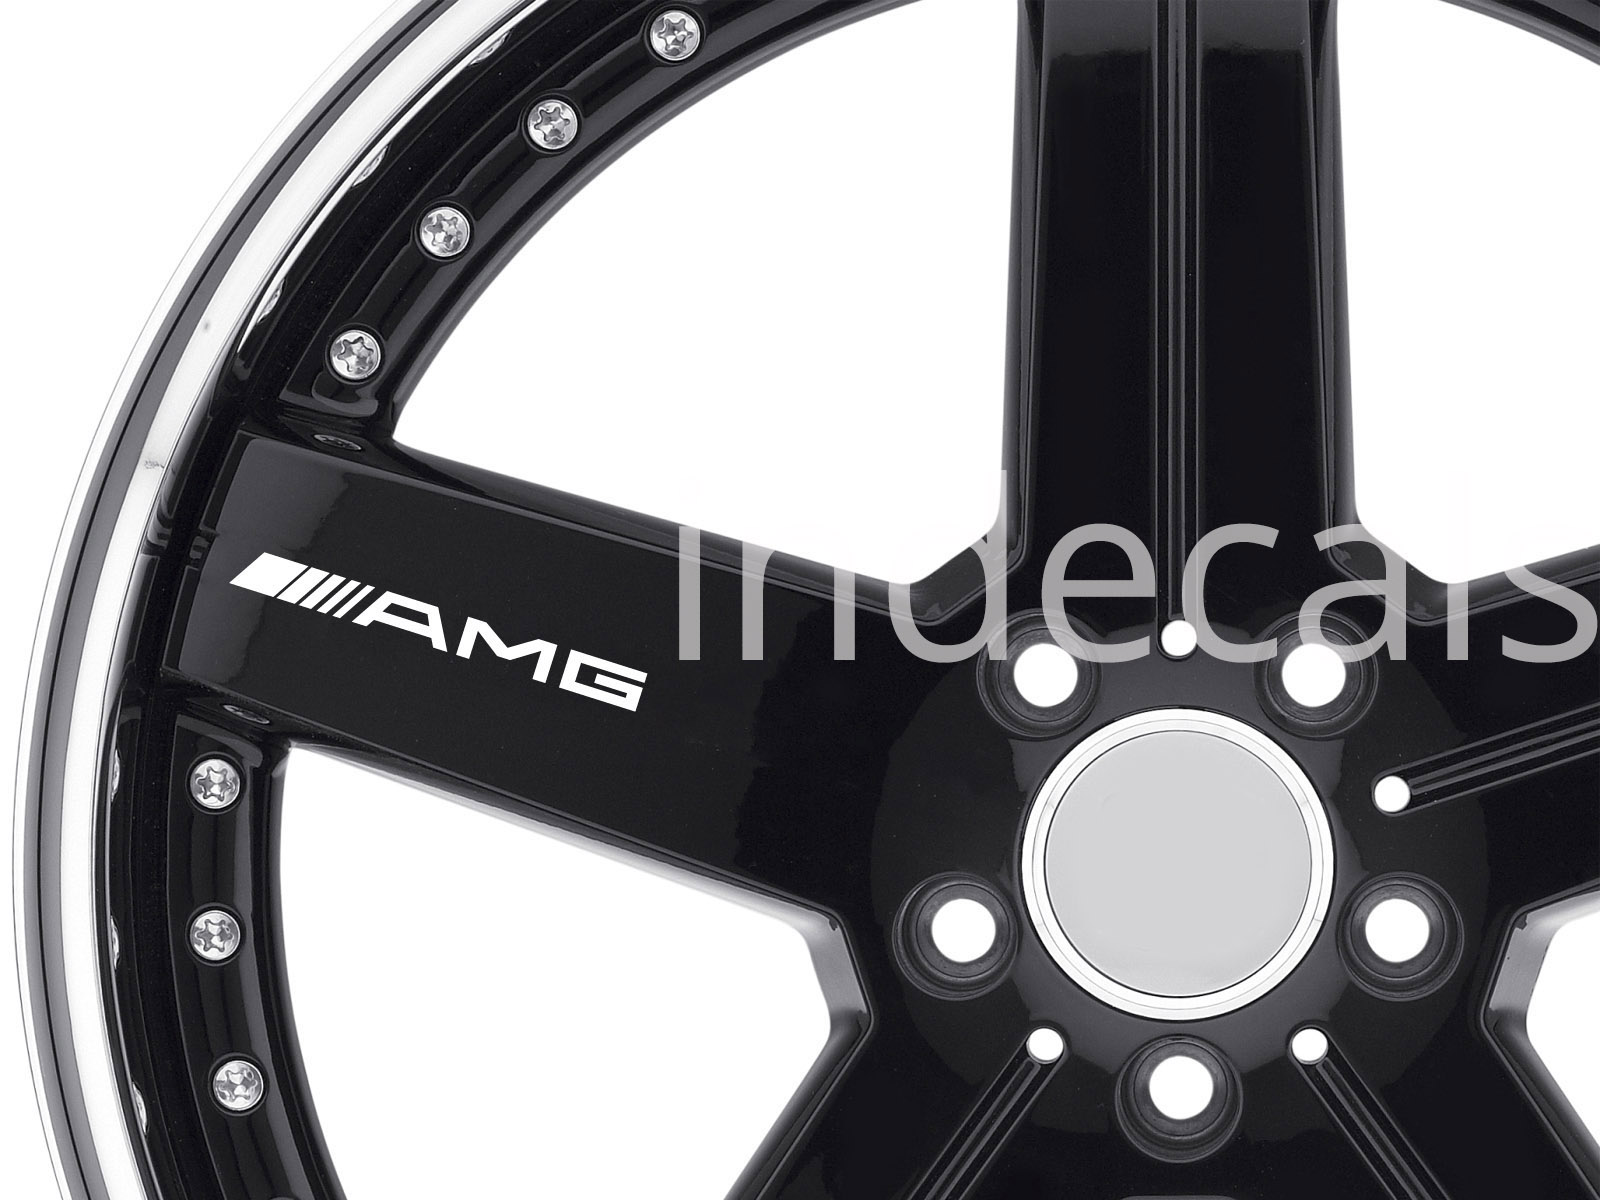 6 x AMG Stickers for Wheels - White